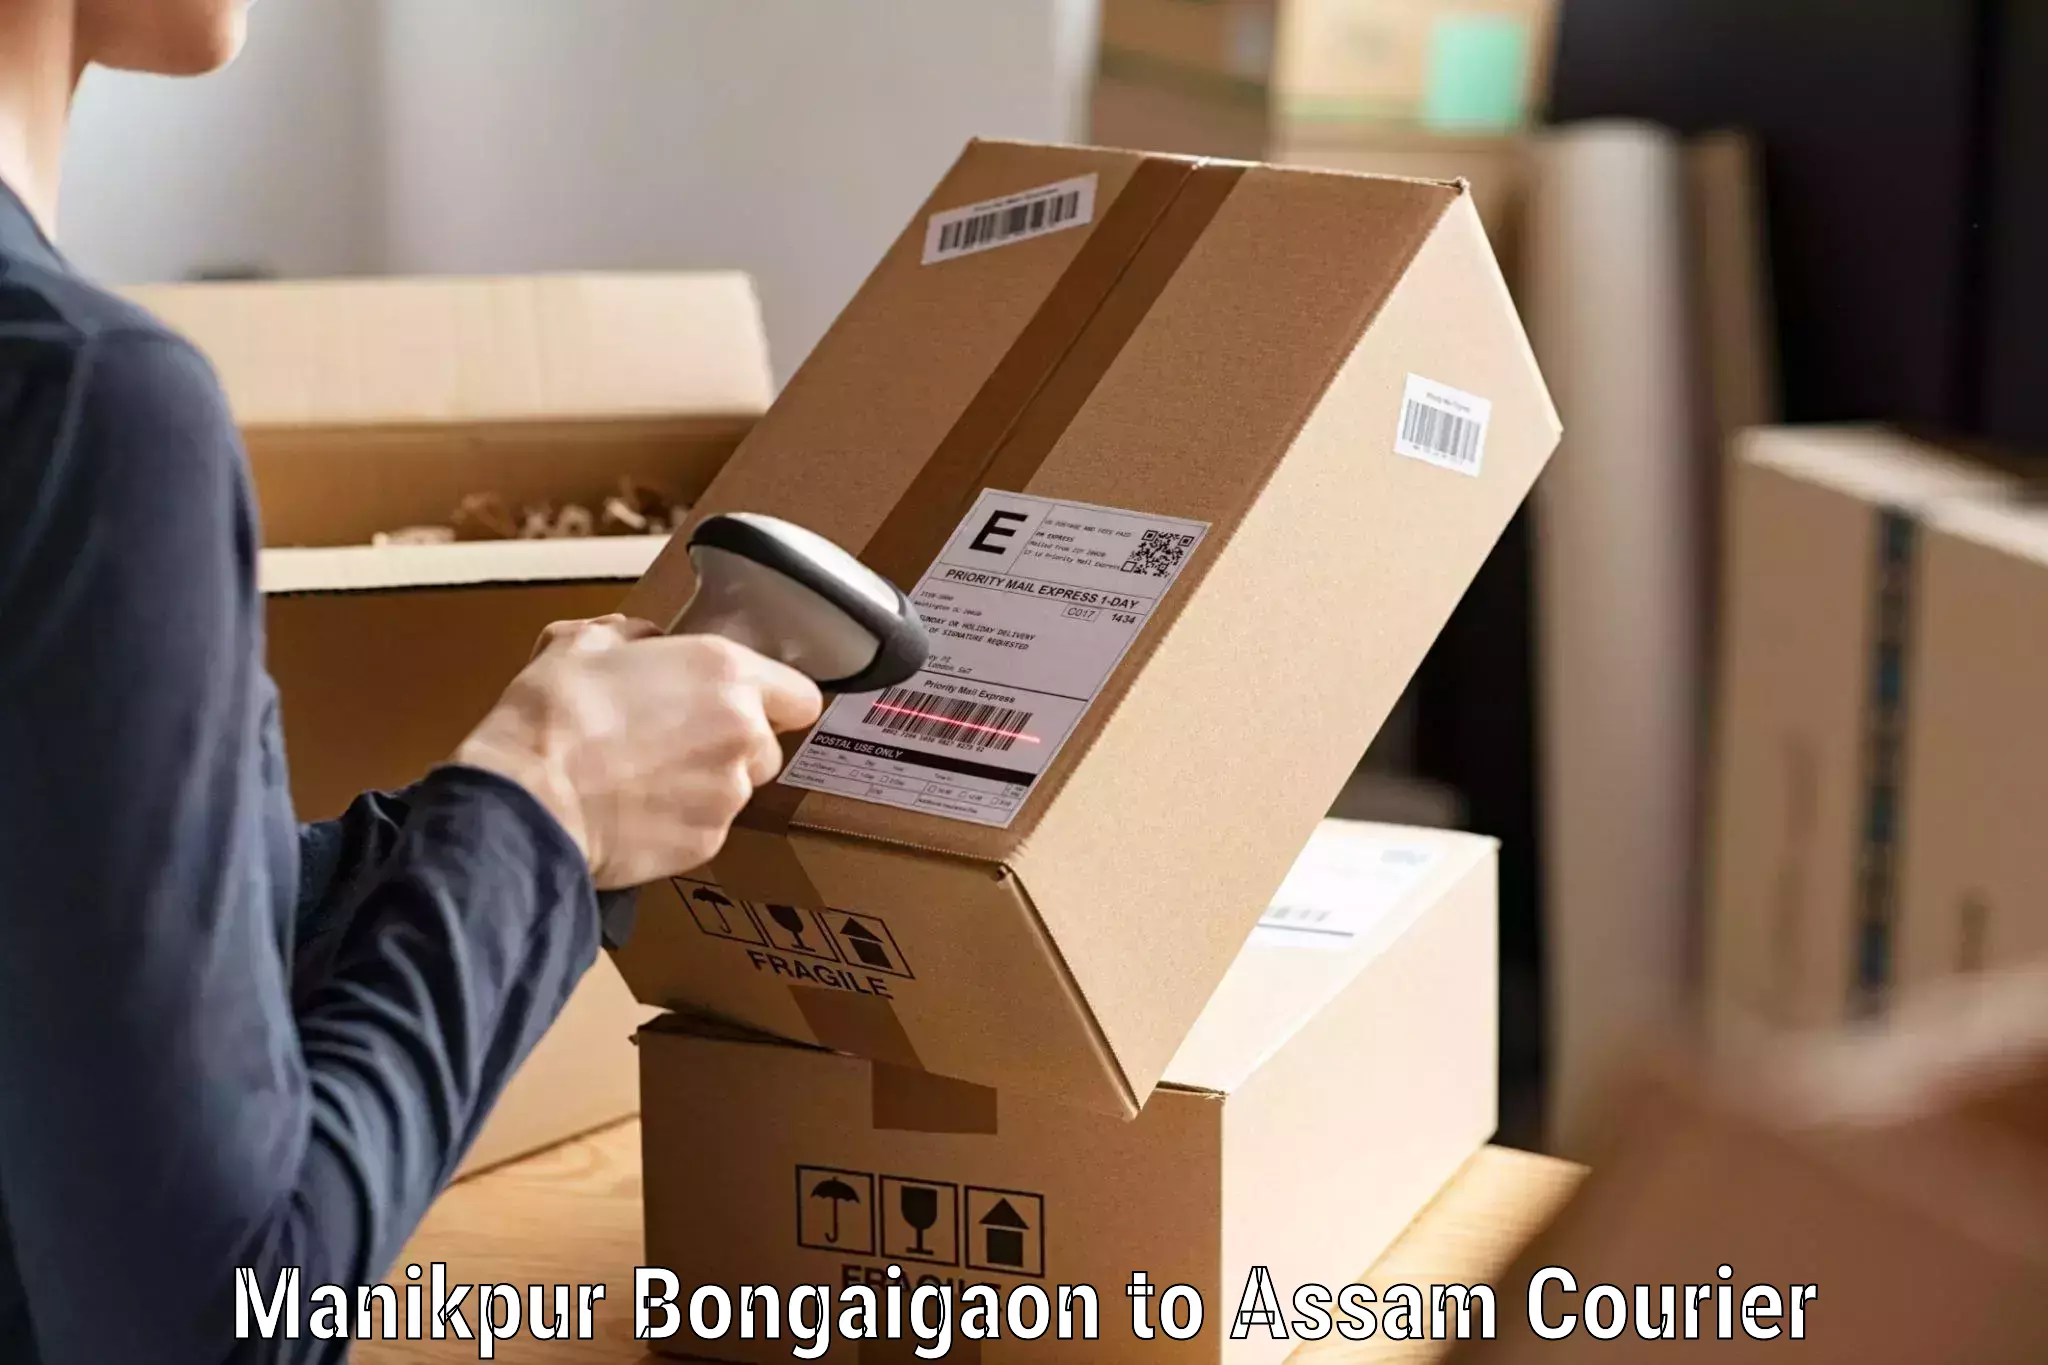 Cost-effective shipping solutions Manikpur Bongaigaon to Haflong